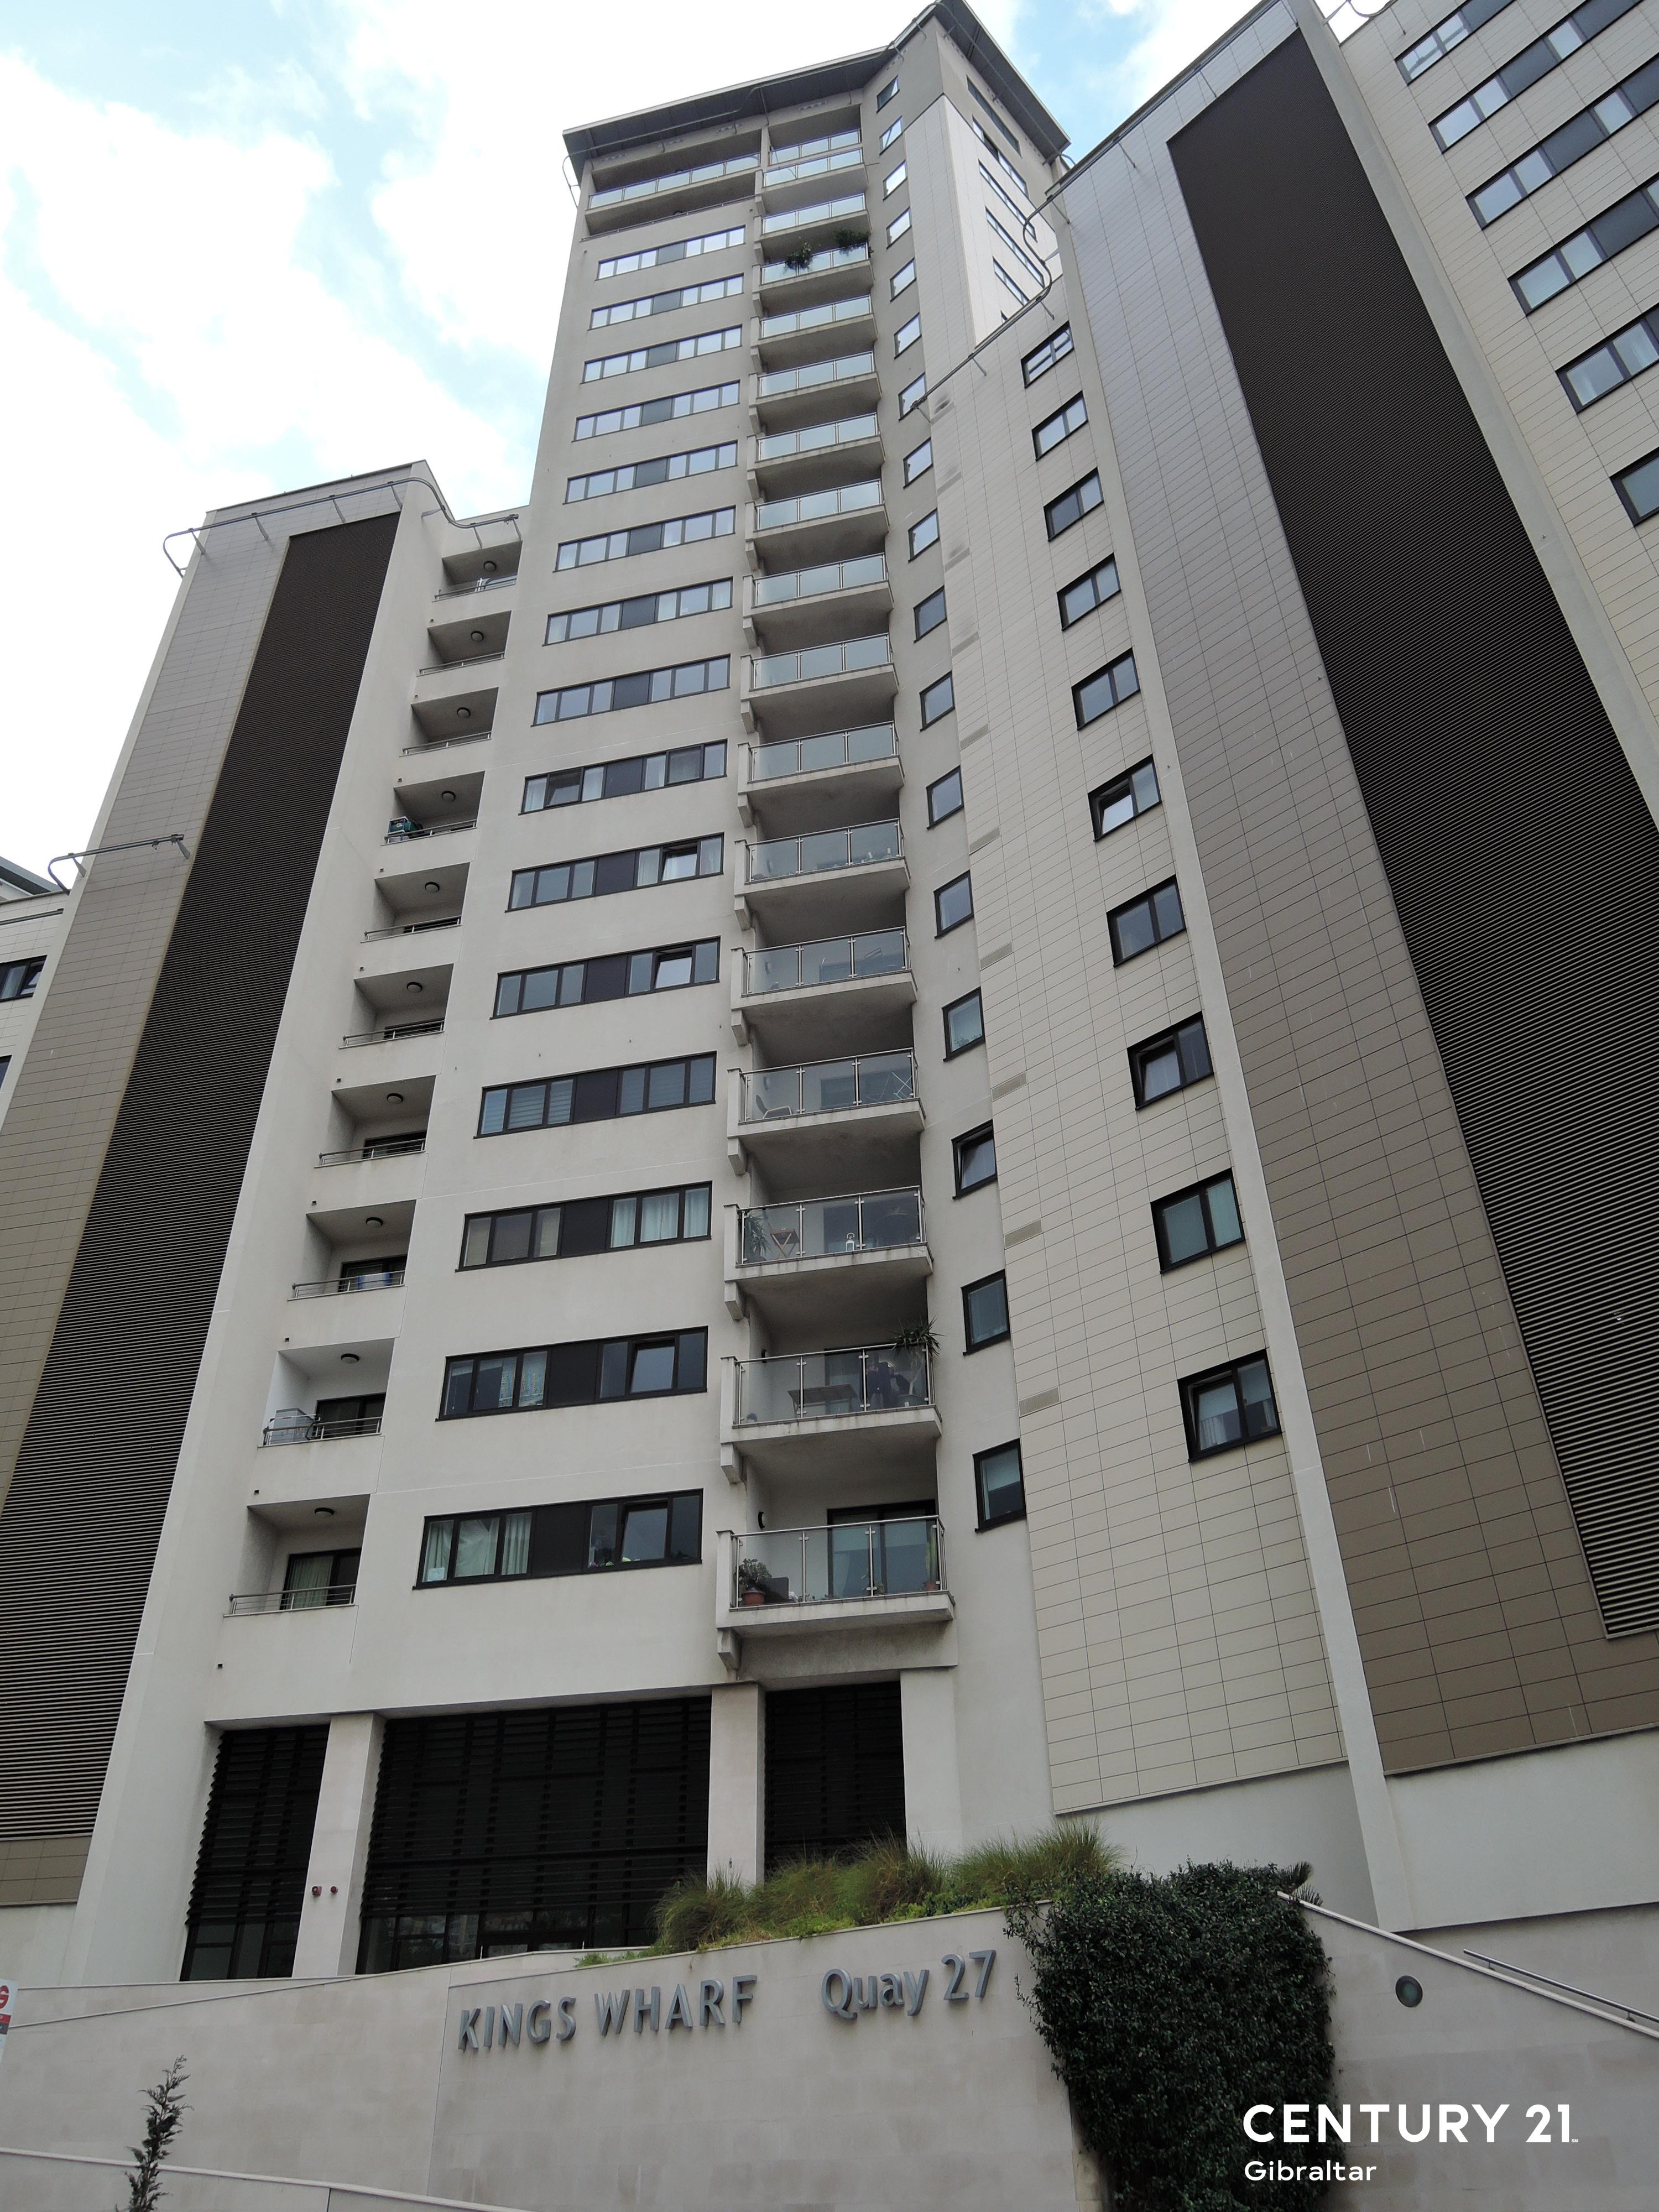 1 Bedroom Apartment For Sale In Kings Wharf Quay 27 Gibraltar